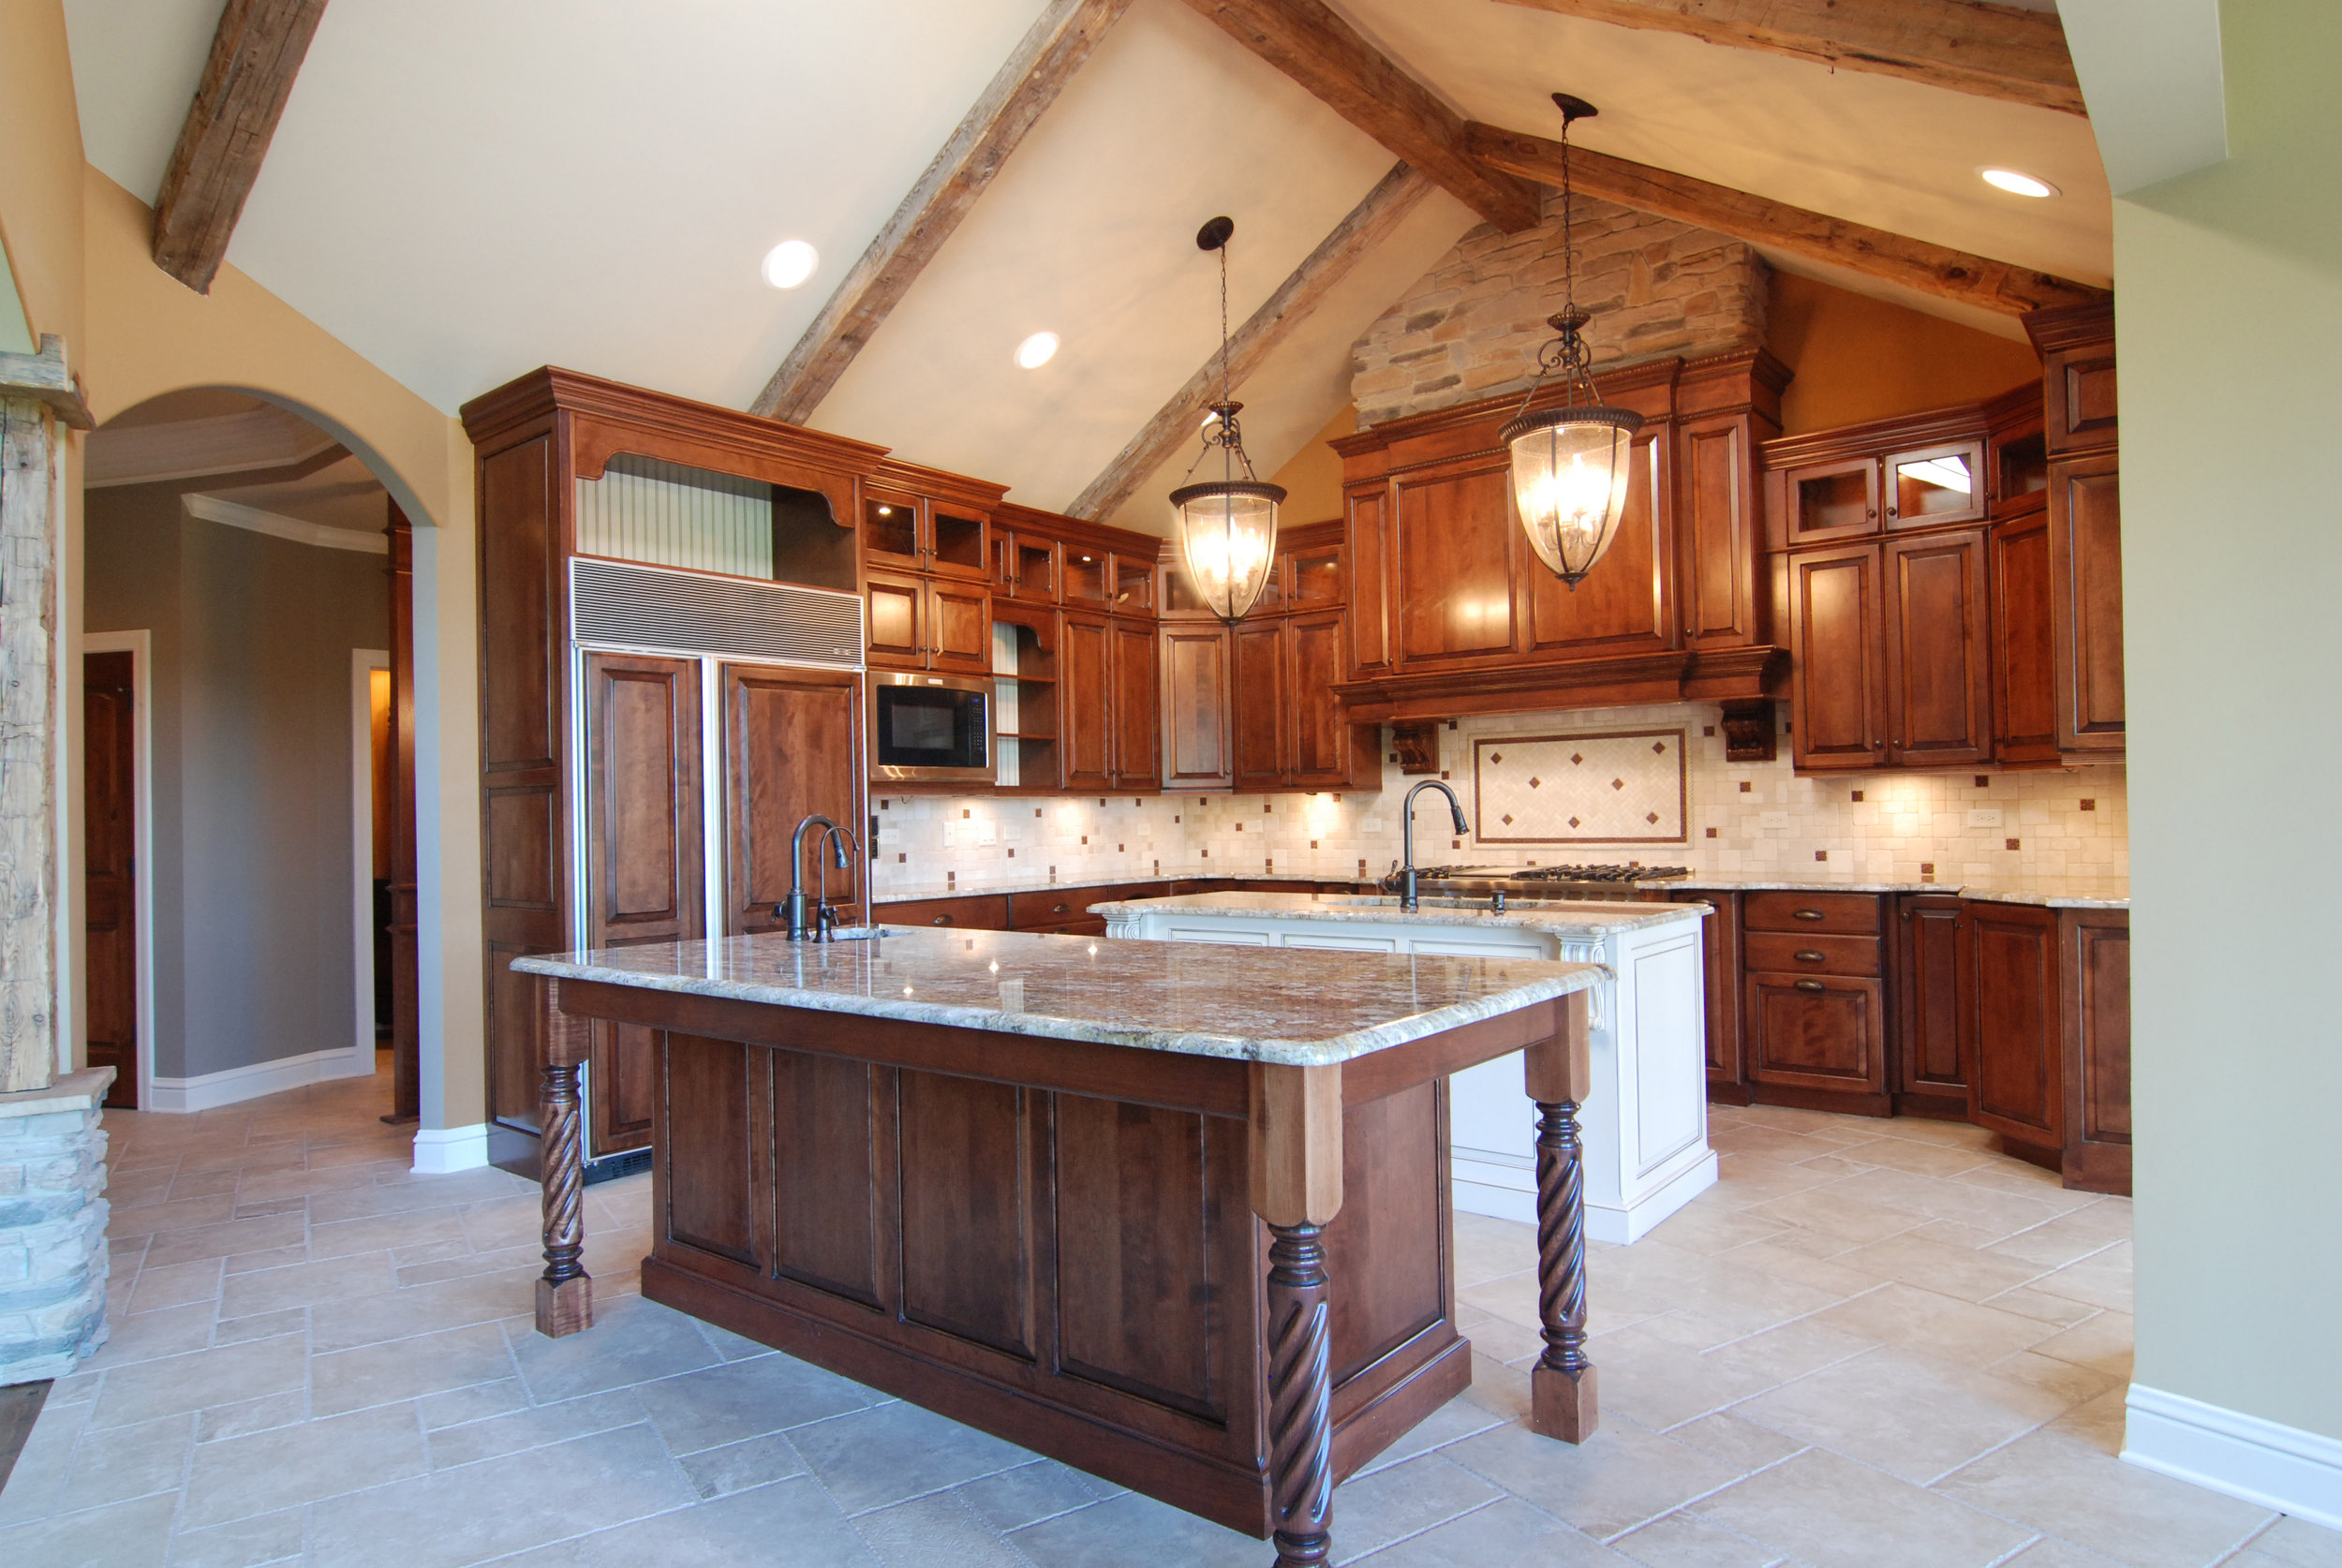 NAPERVILLE IL KITCHEN RUSTIC REMODELING 